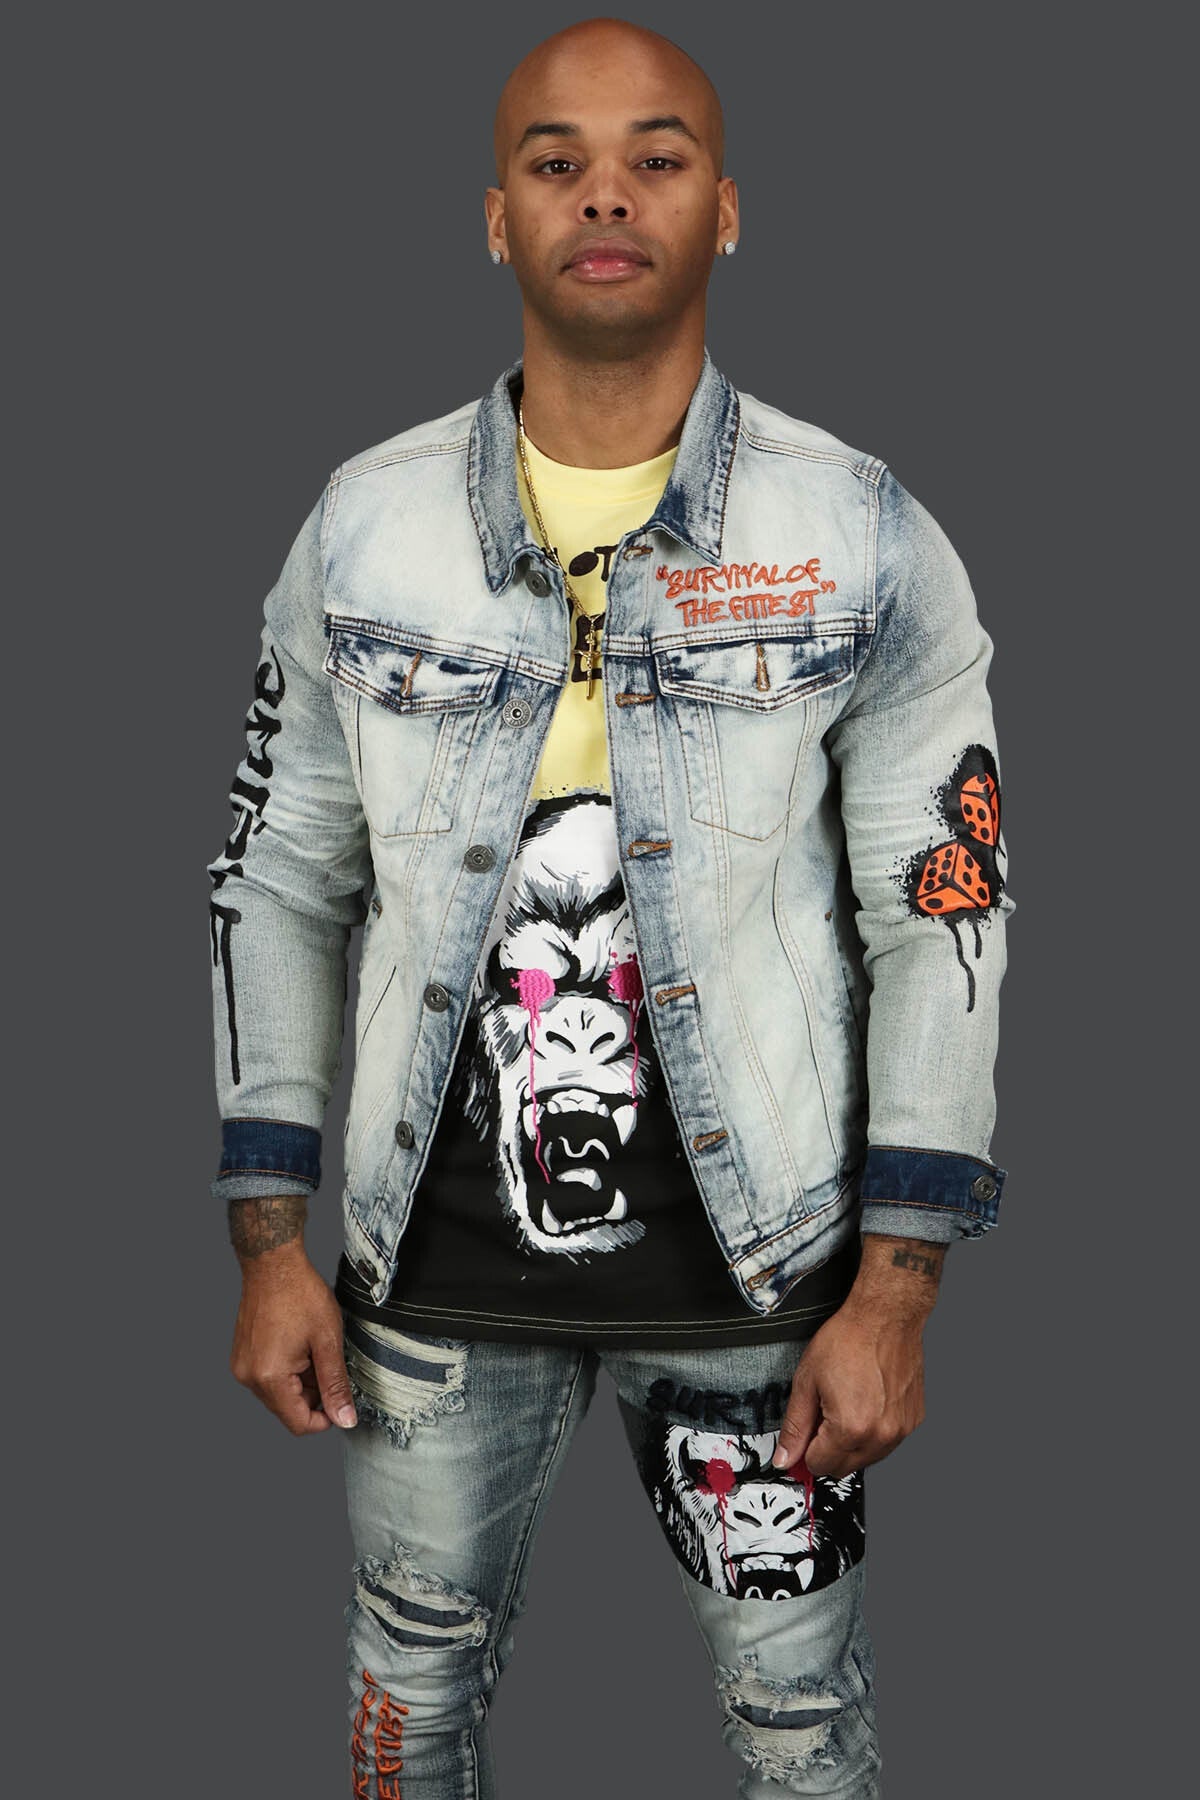 The Only The Strong Custom Hype Beast Spray Painted Streetwear T-Shirt Motive Denim | Yellow |  matching with the only the string custom jean jacket from motive denim and the motive denim custom spray painted denim jeans